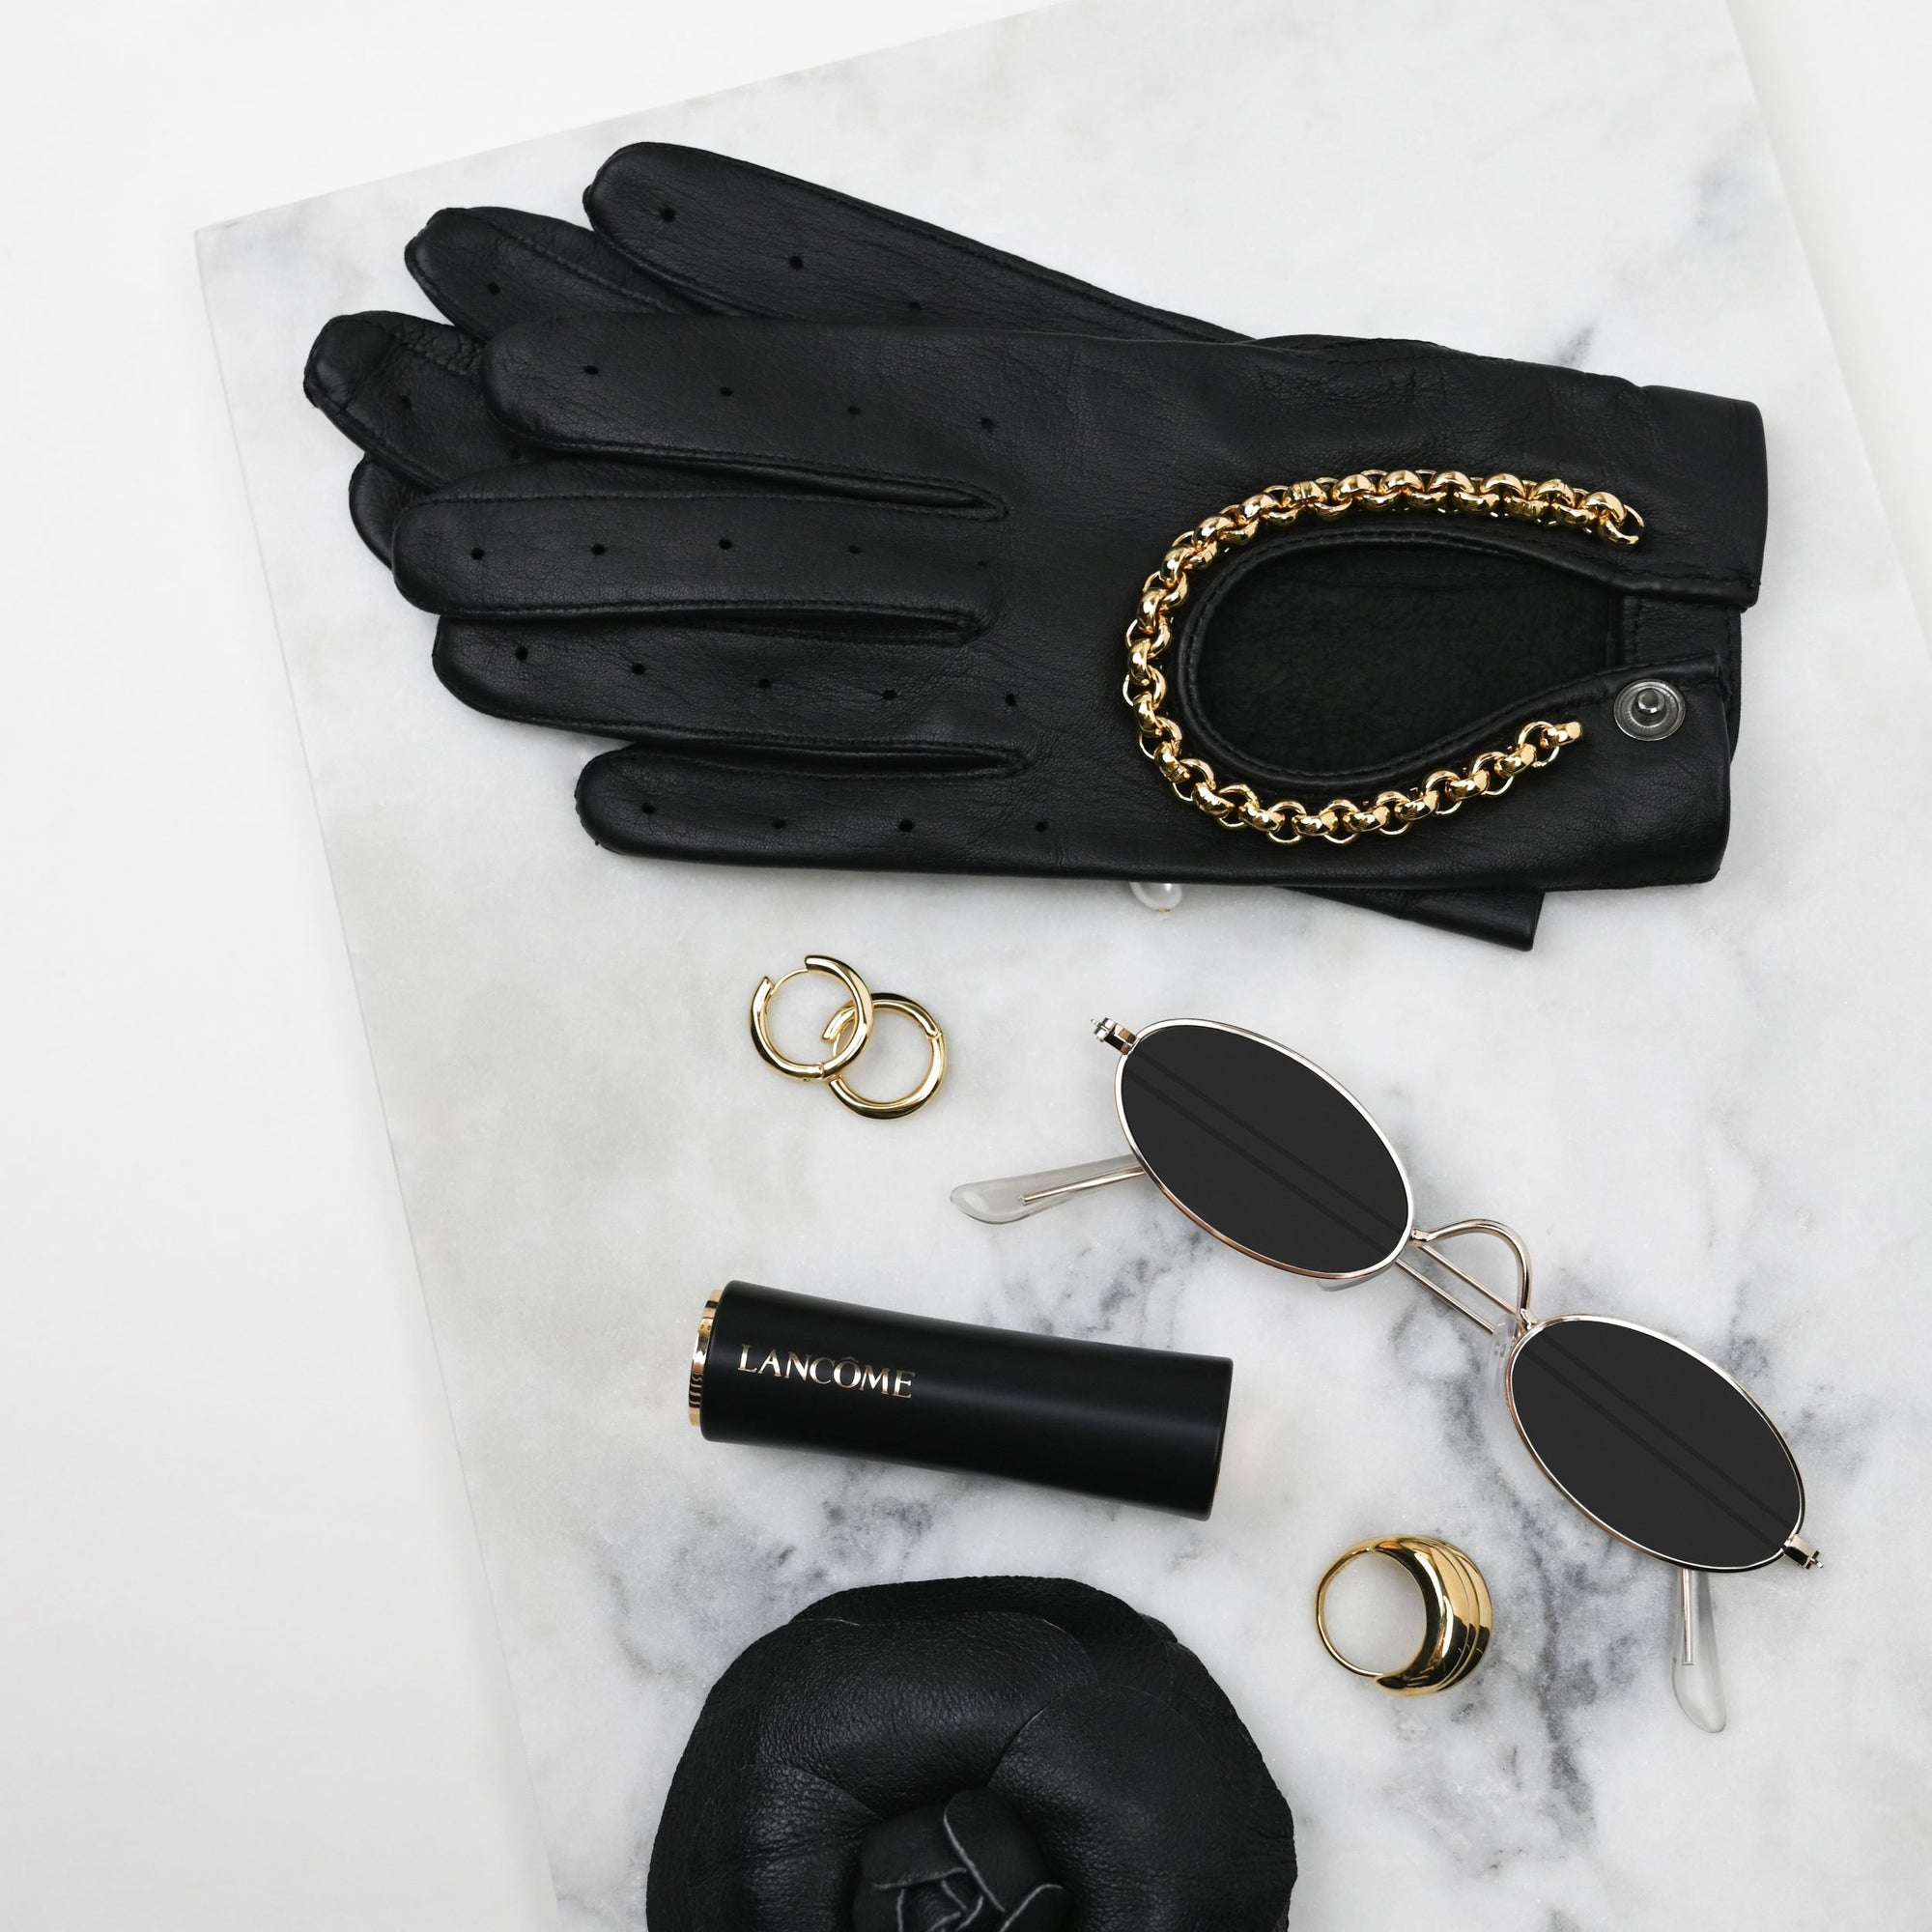 Soft italan lamb skin gloves with embroidered details